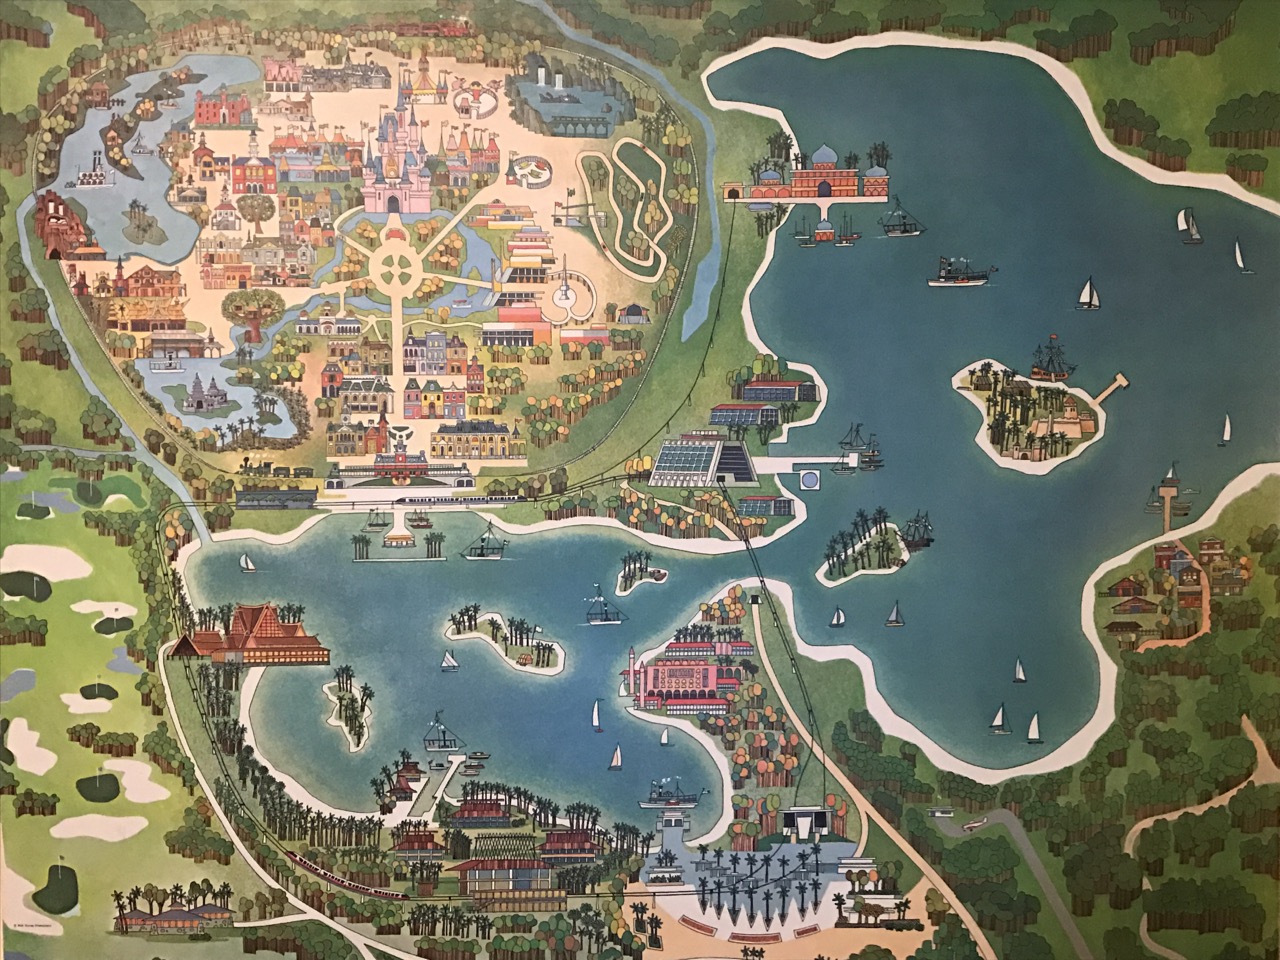 A map of what the Walt Disney World property would become as envisioned around opening in 1971